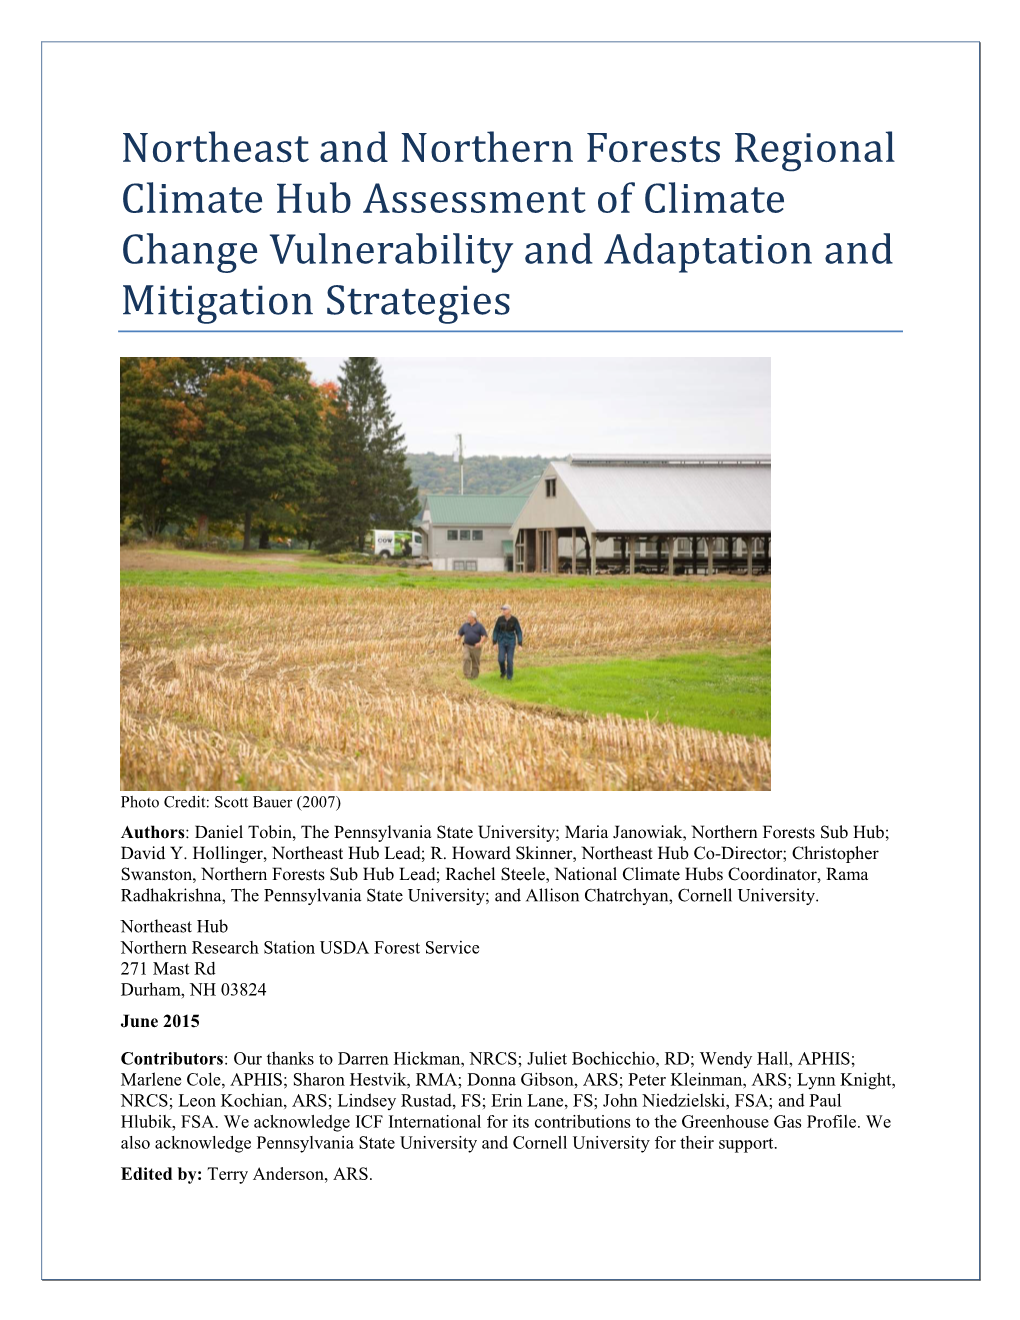 Northeast and Northern Forests Regional Climate Hub Assessment of Climate Change Vulnerability and Adaptation and Mitigation Strategies